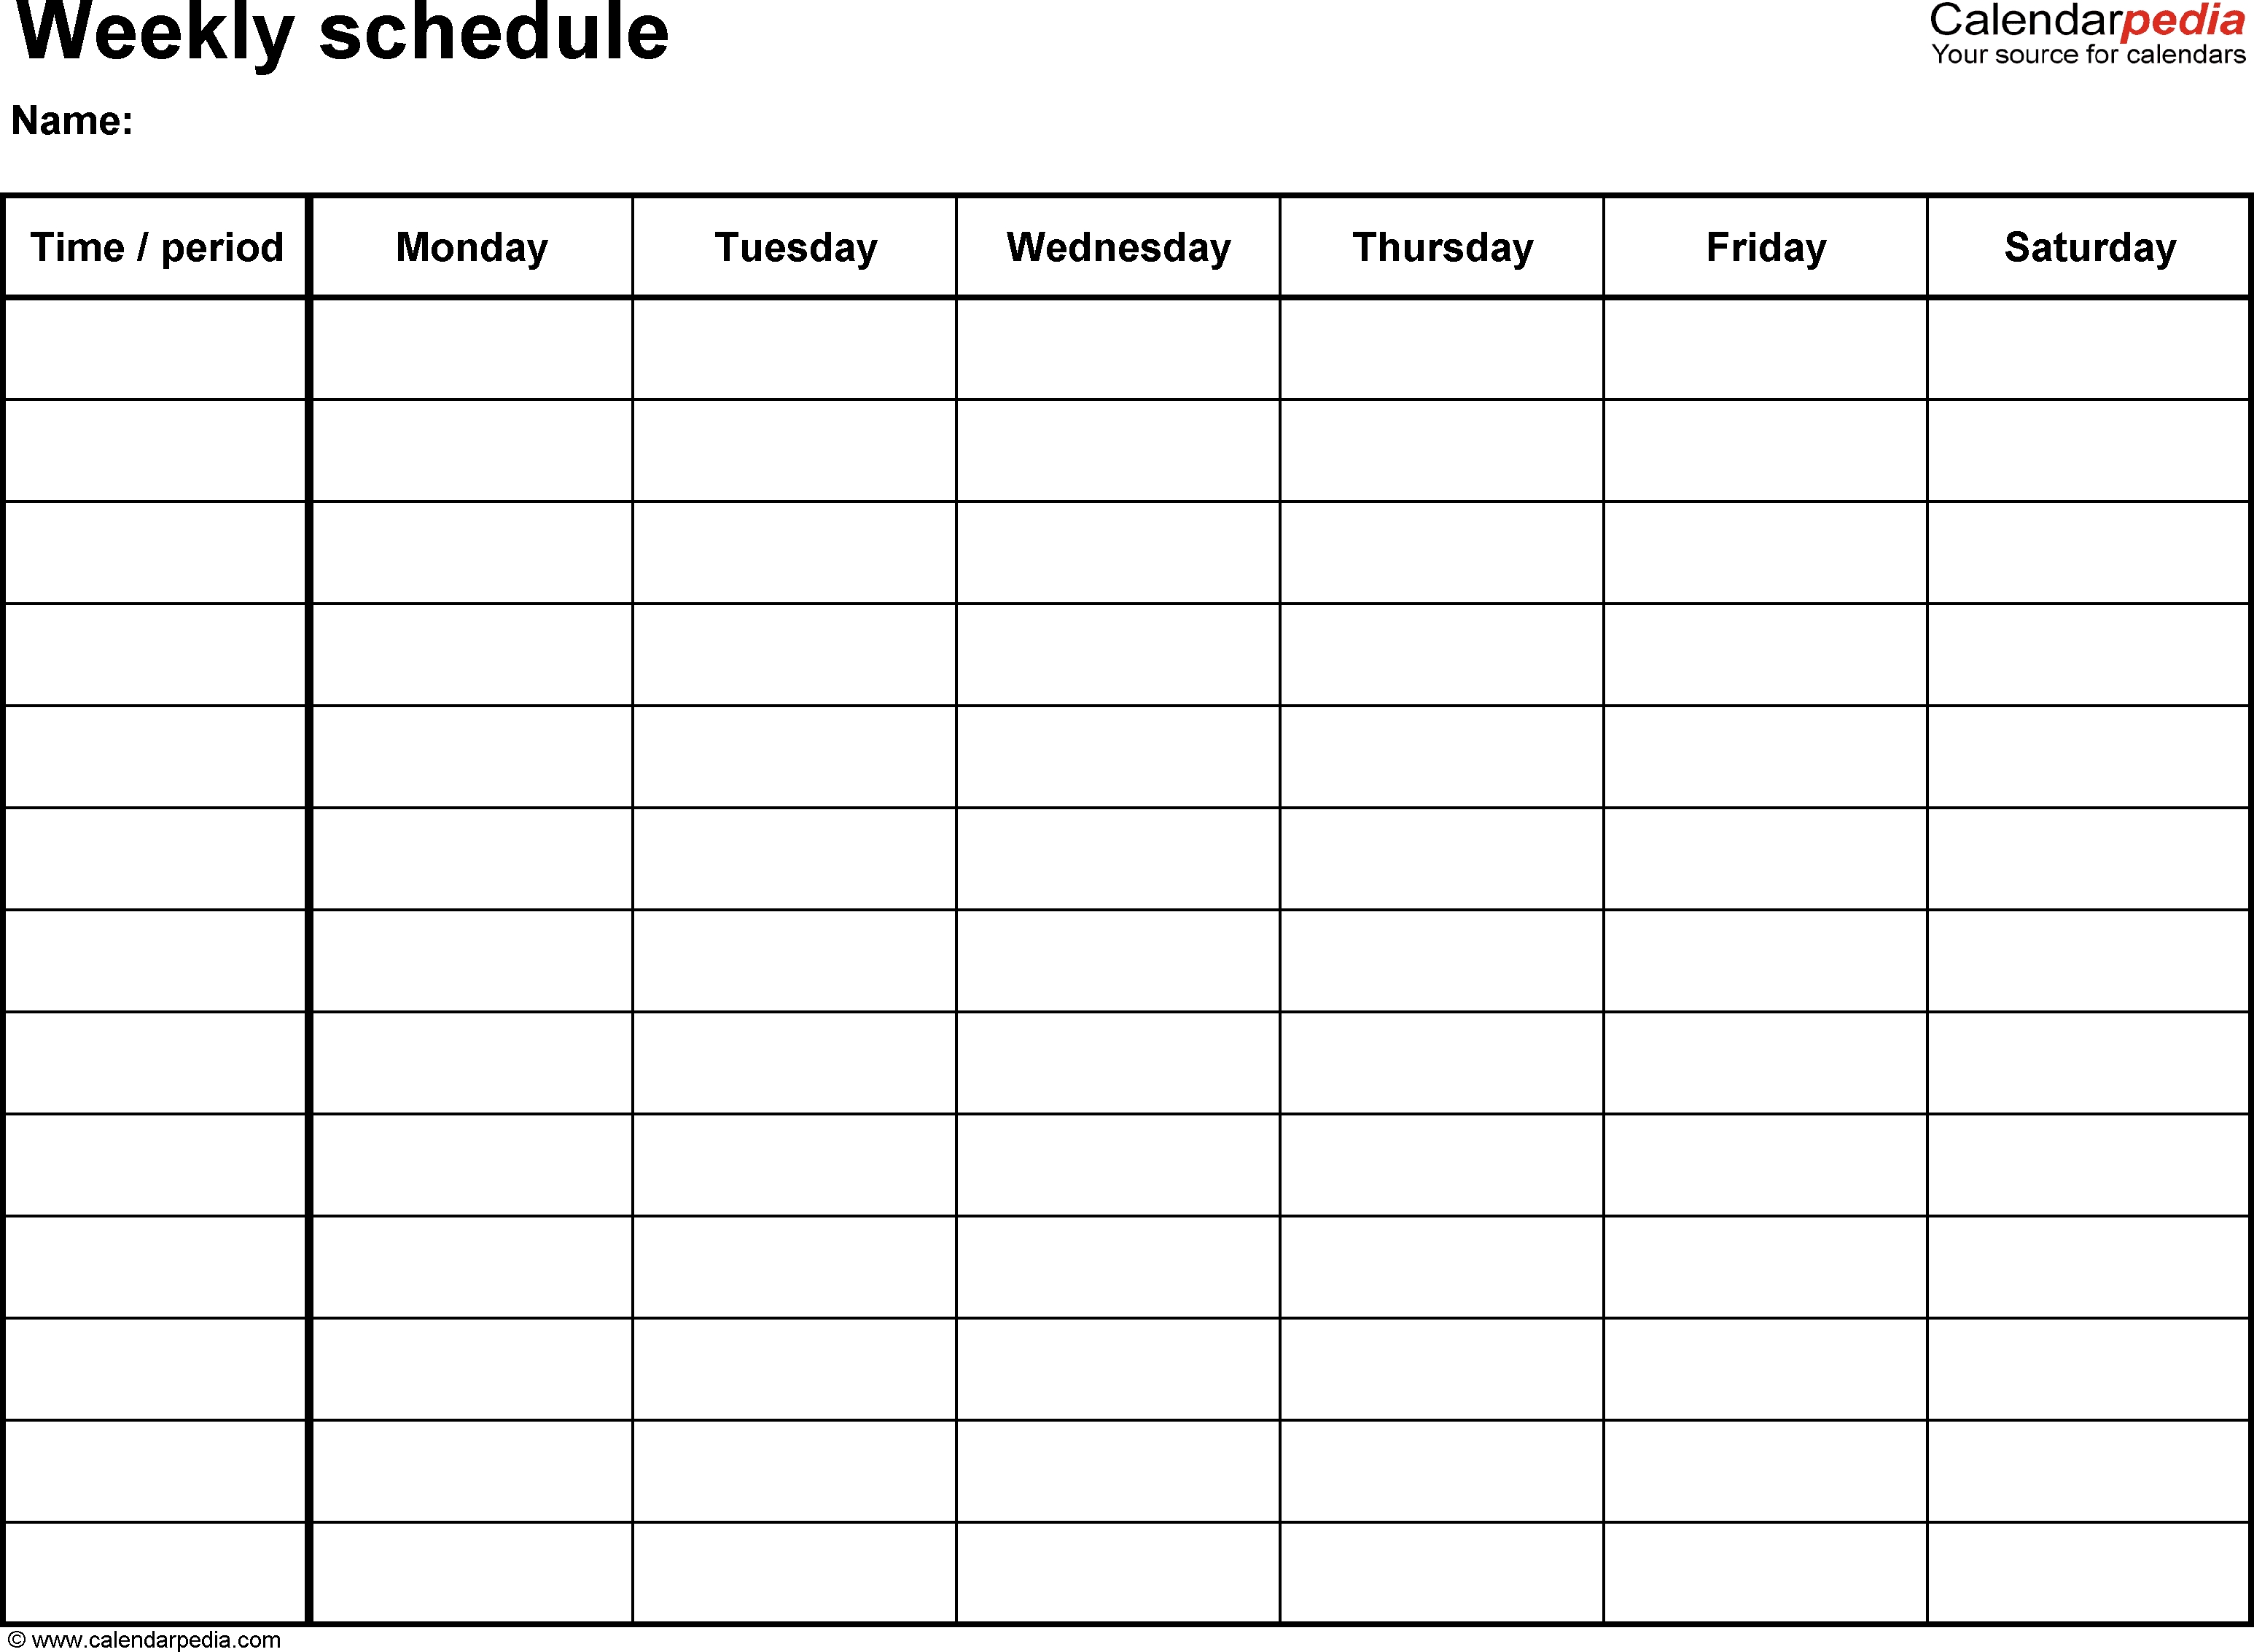 Free Weekly Schedule Templates For Word - 18 Templates with Monday Through Friday Schedule Template Free